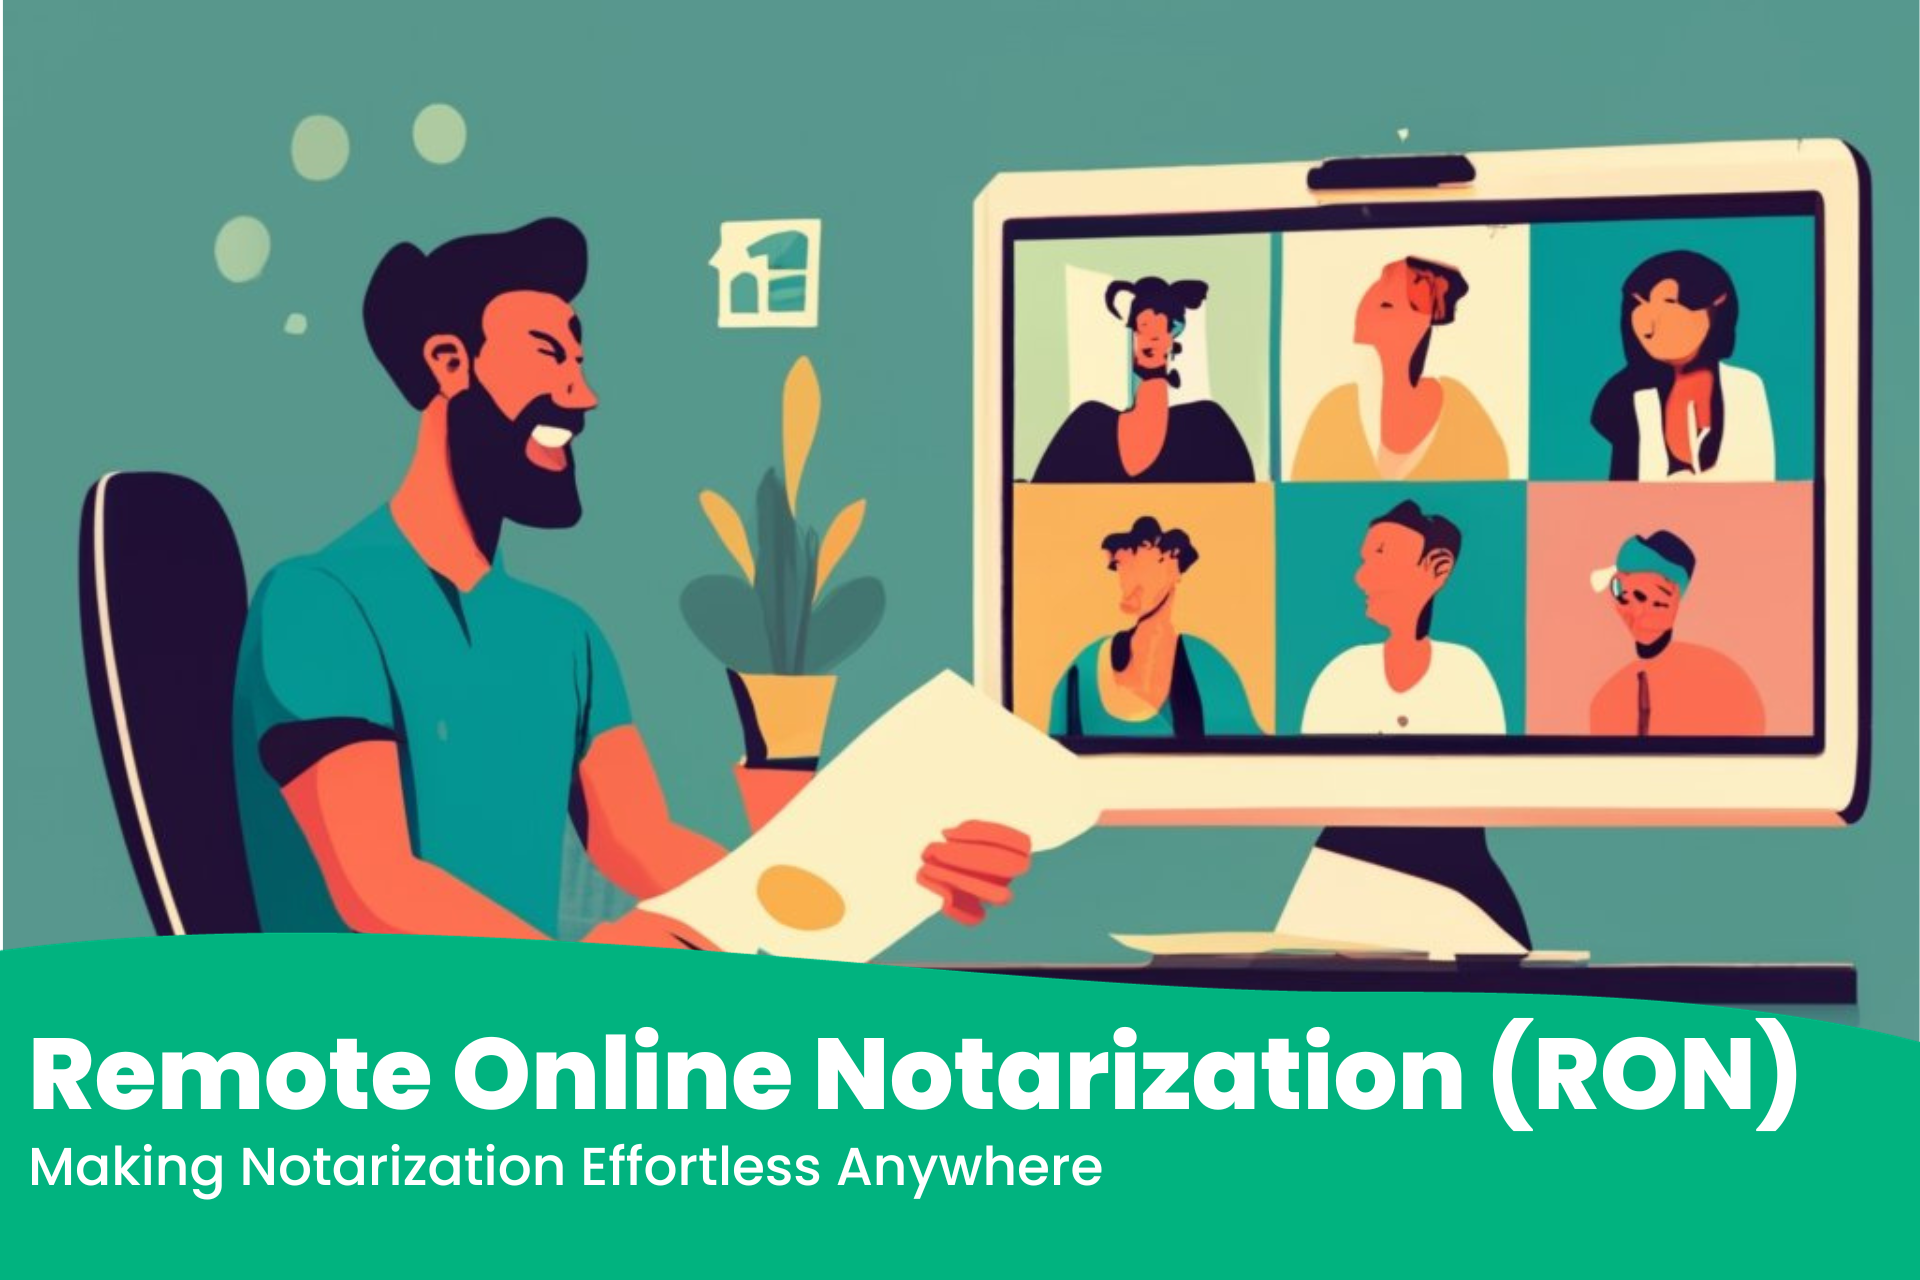 Cartoon illustration of a online notary session with 6 participants